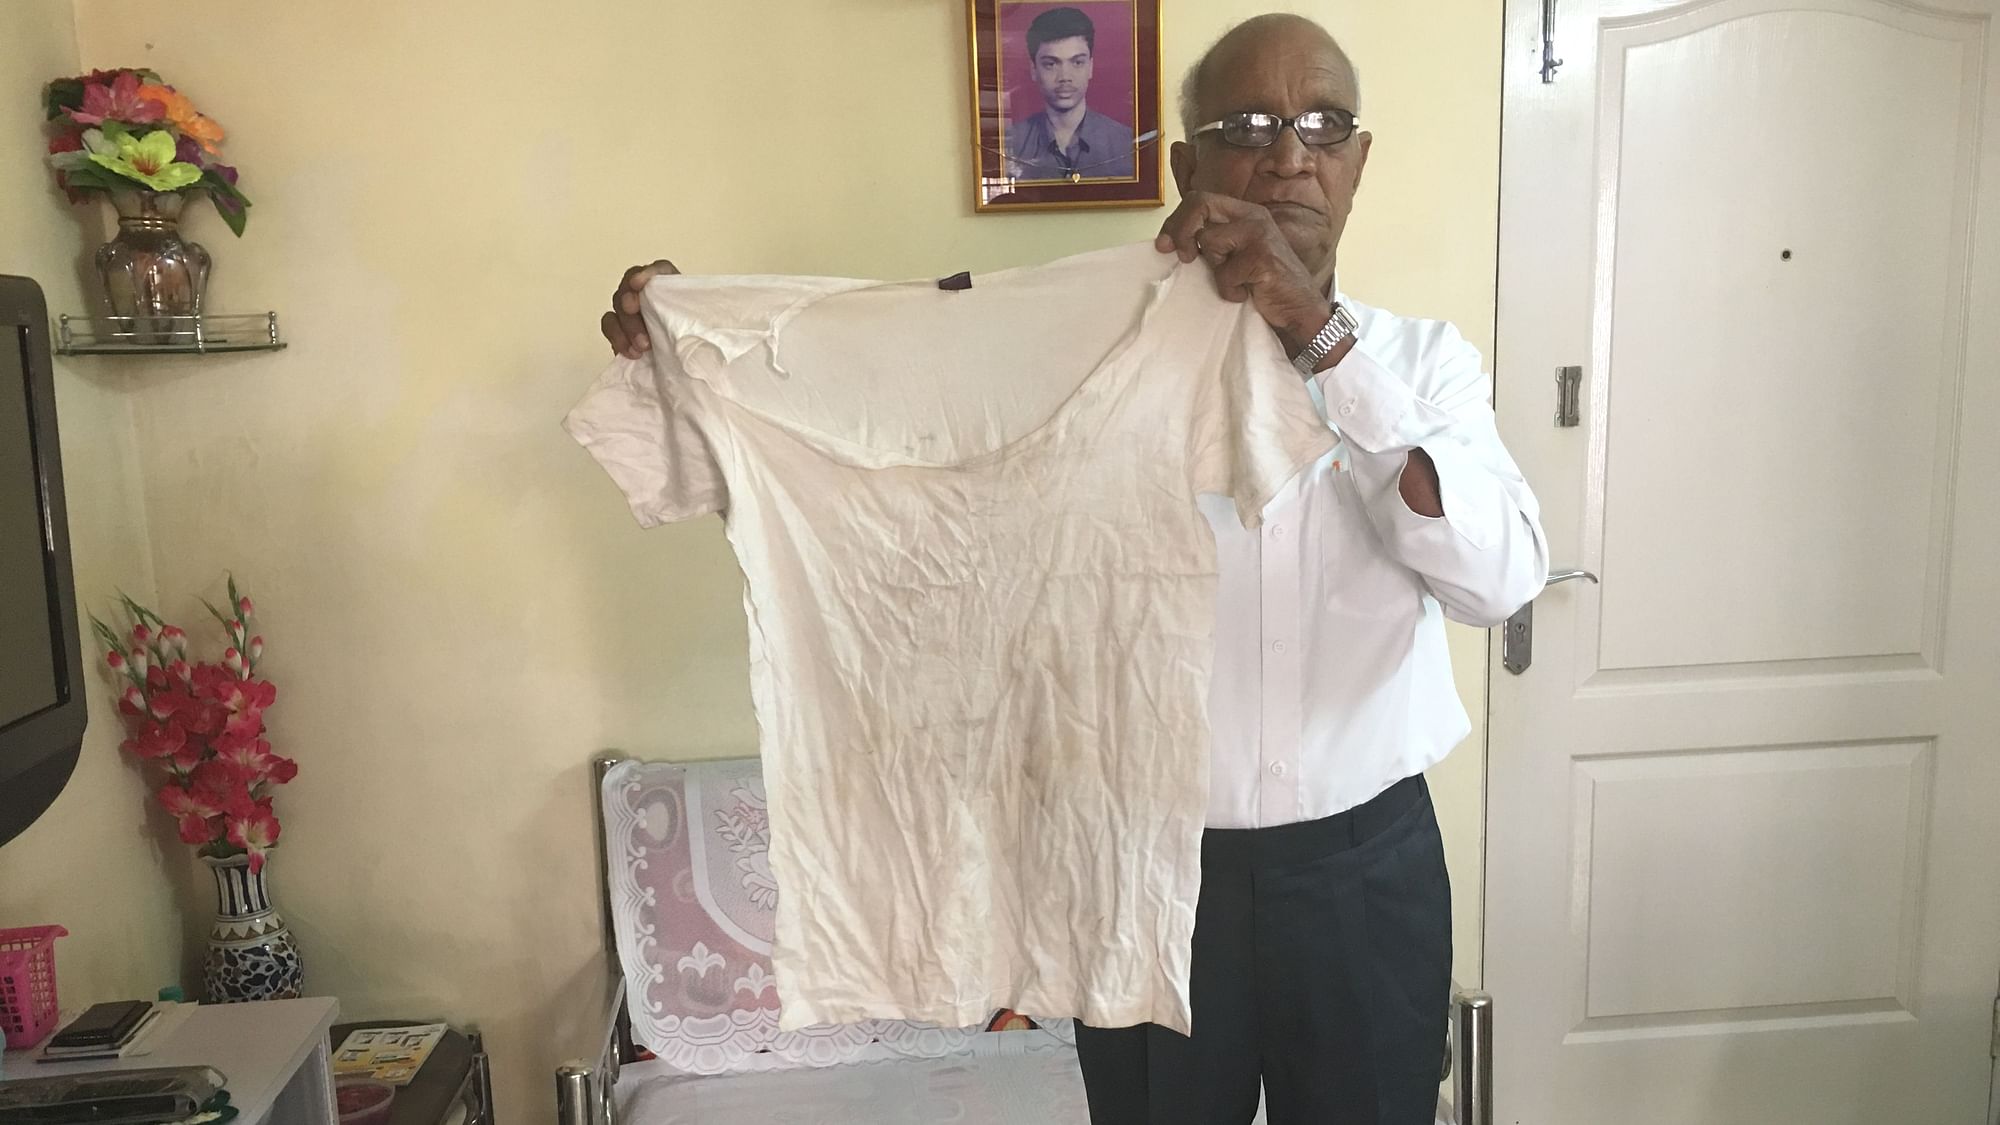 Dr Dattatray Nimje holds up the T-shirt he was wearing the day he was assaulted by the police at Wadala police station,&nbsp;